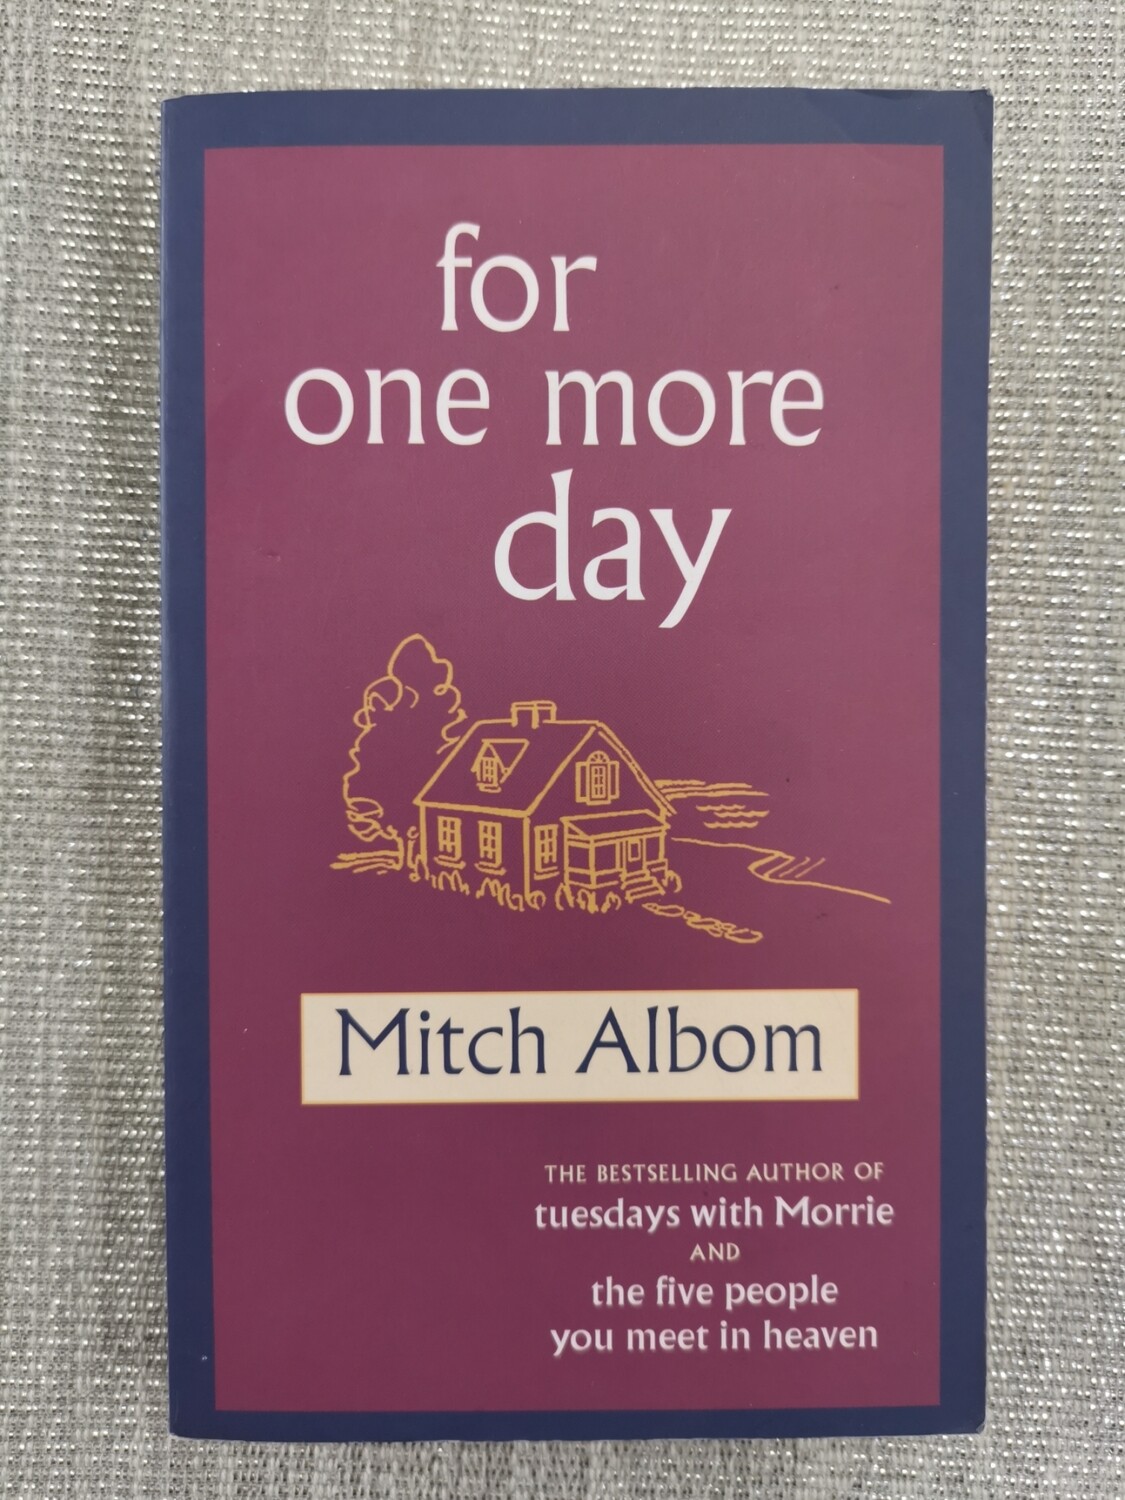 For one more day, Mitch Albom